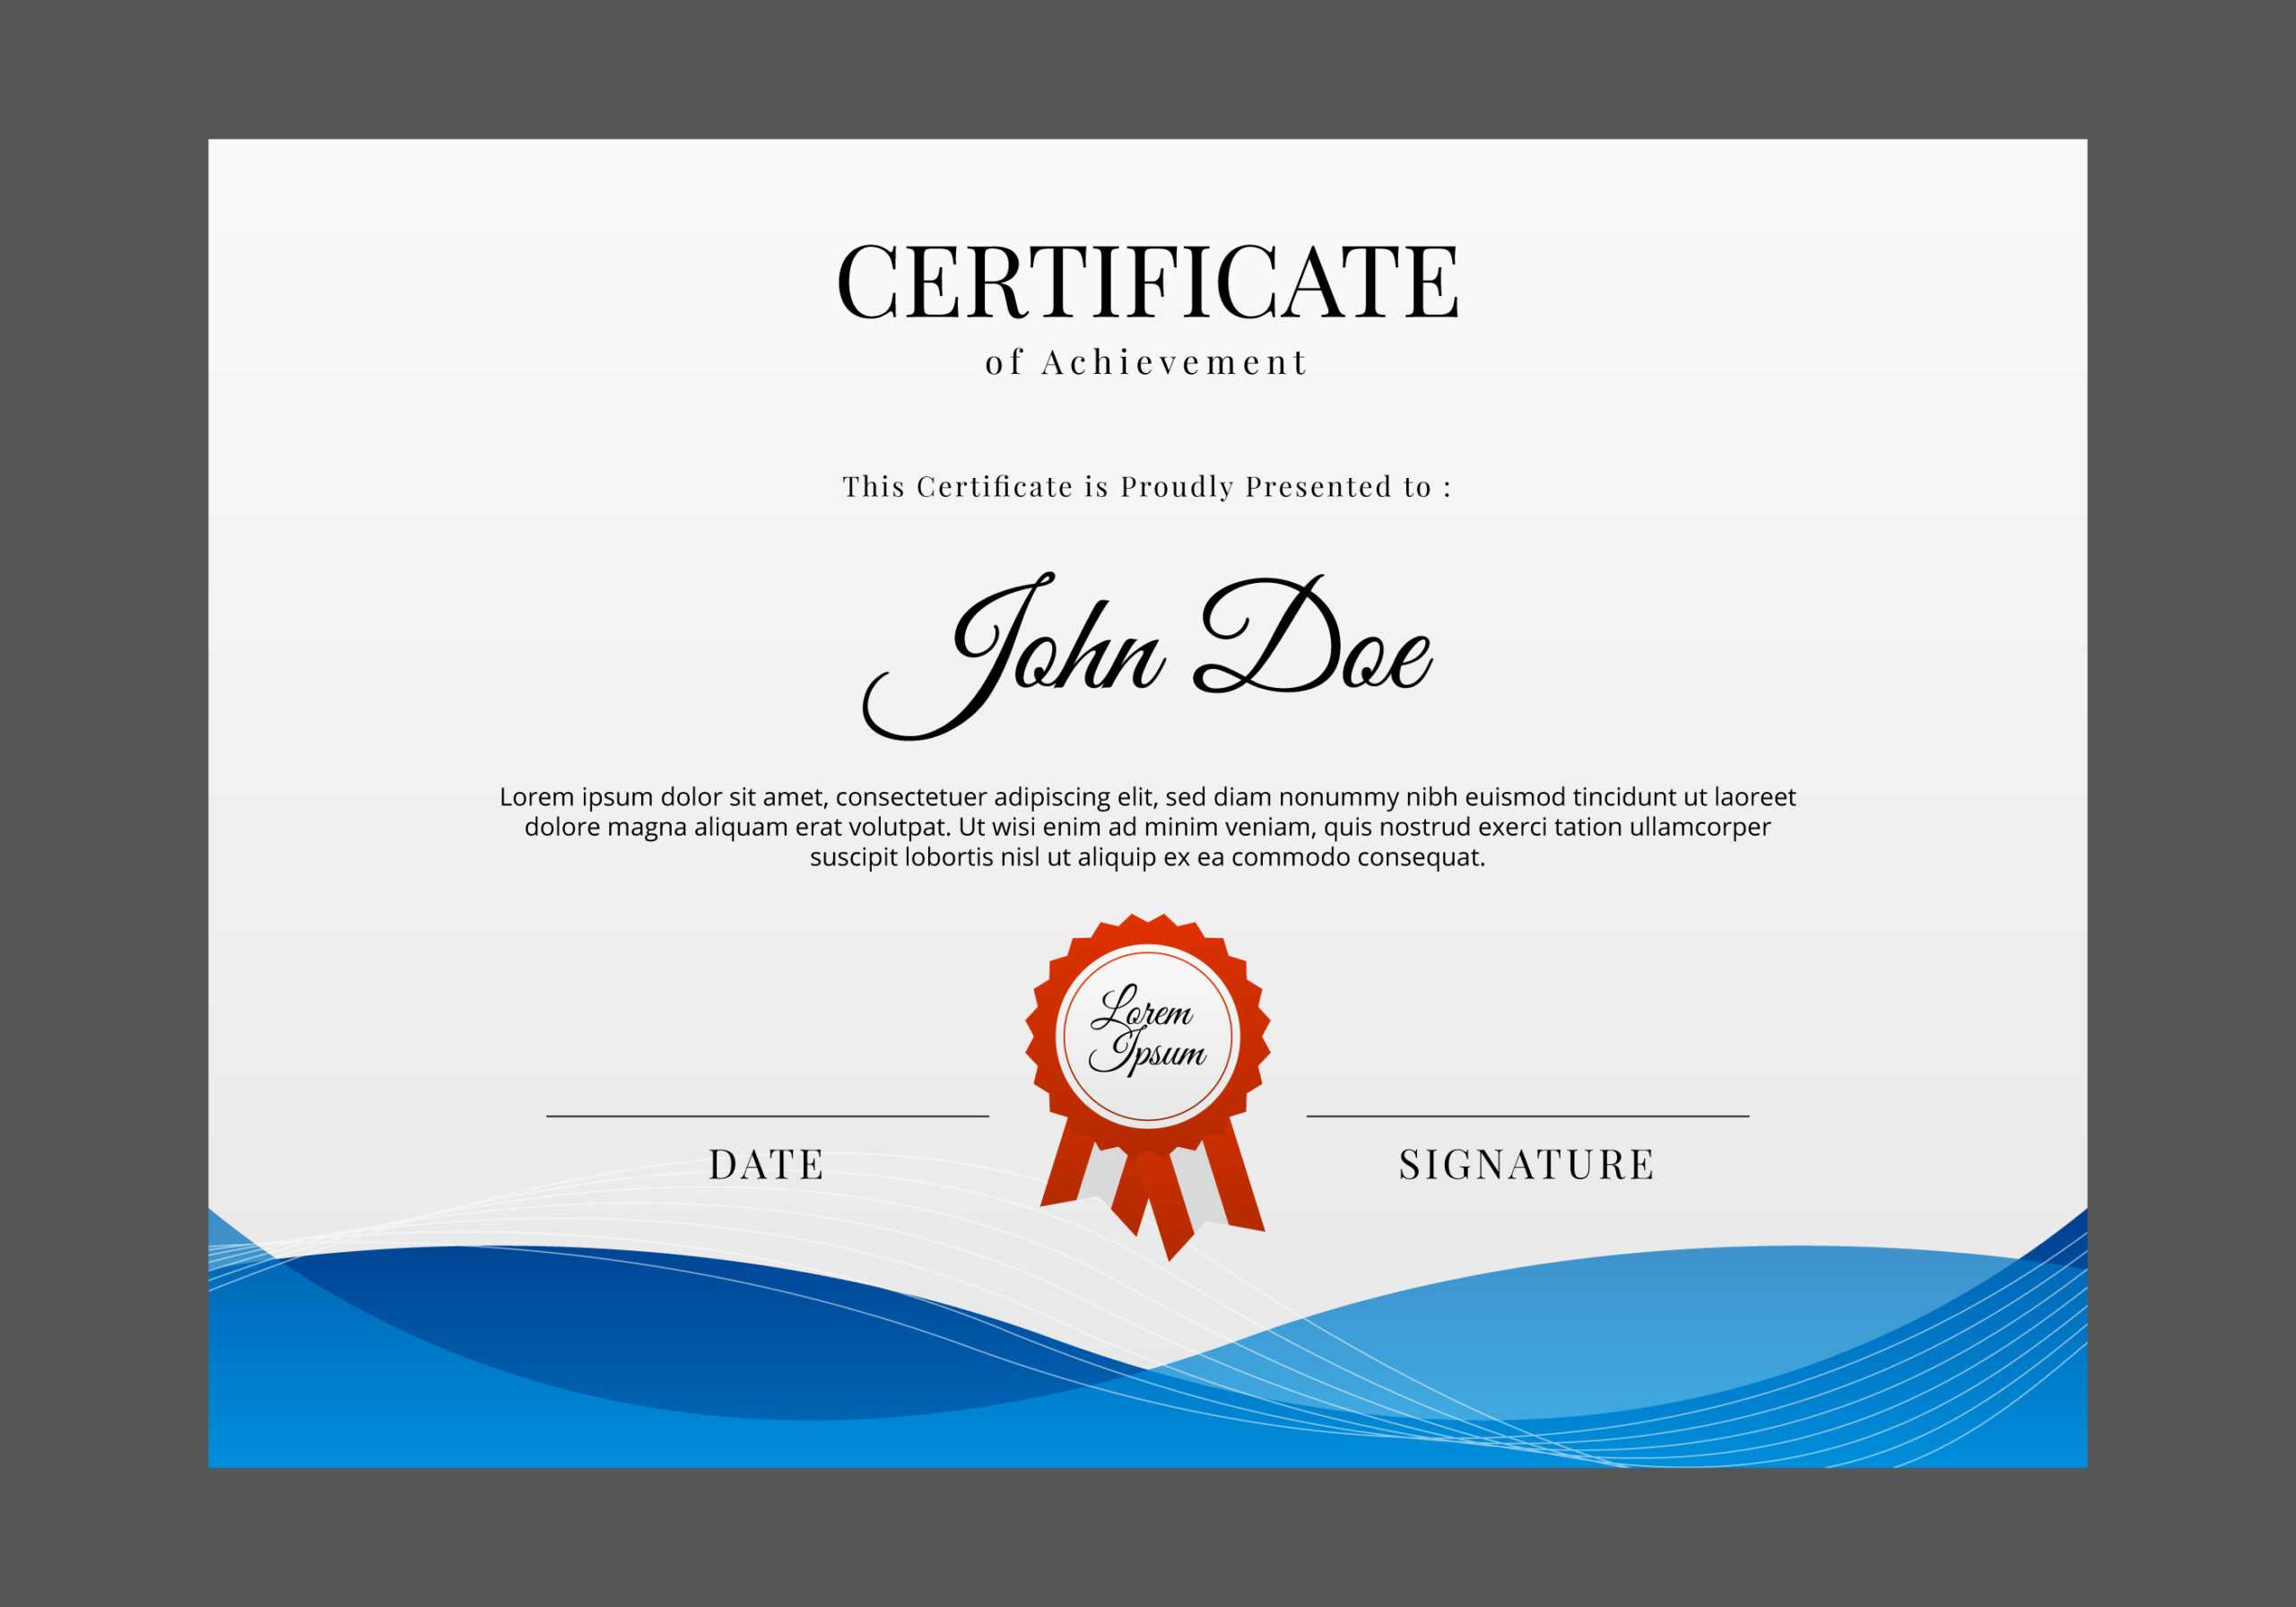 Certificate Templates, Free Certificate Designs Within Professional Certificate Templates For Word